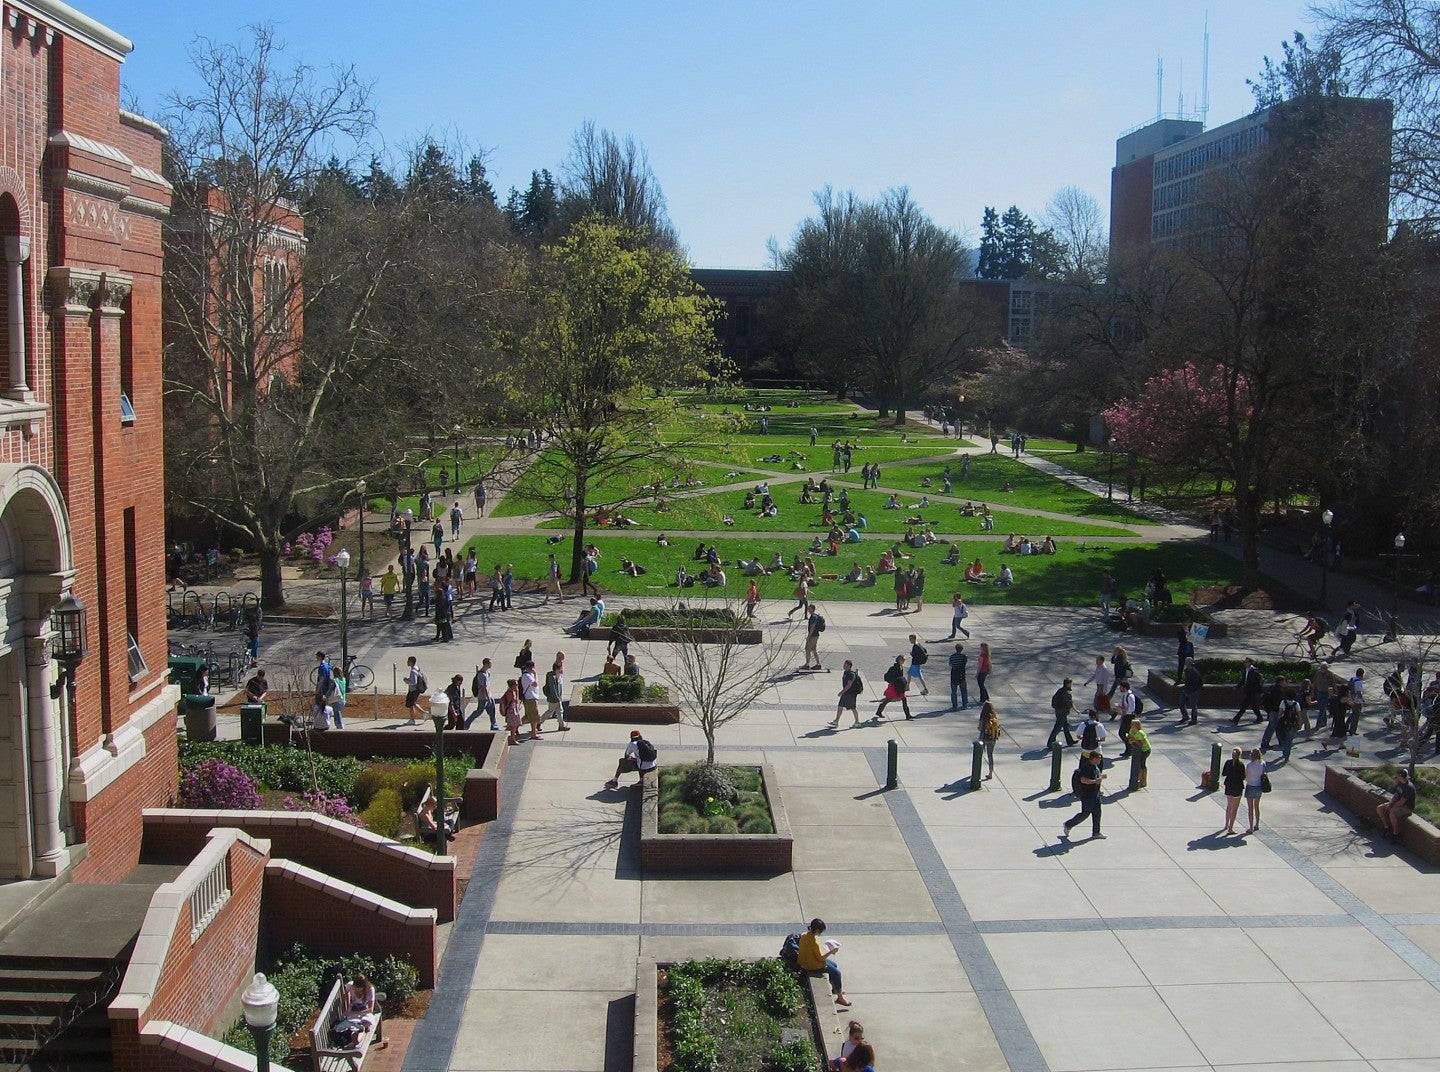 Overview picture of the UO quad with people walking and sitting on a sunny day.